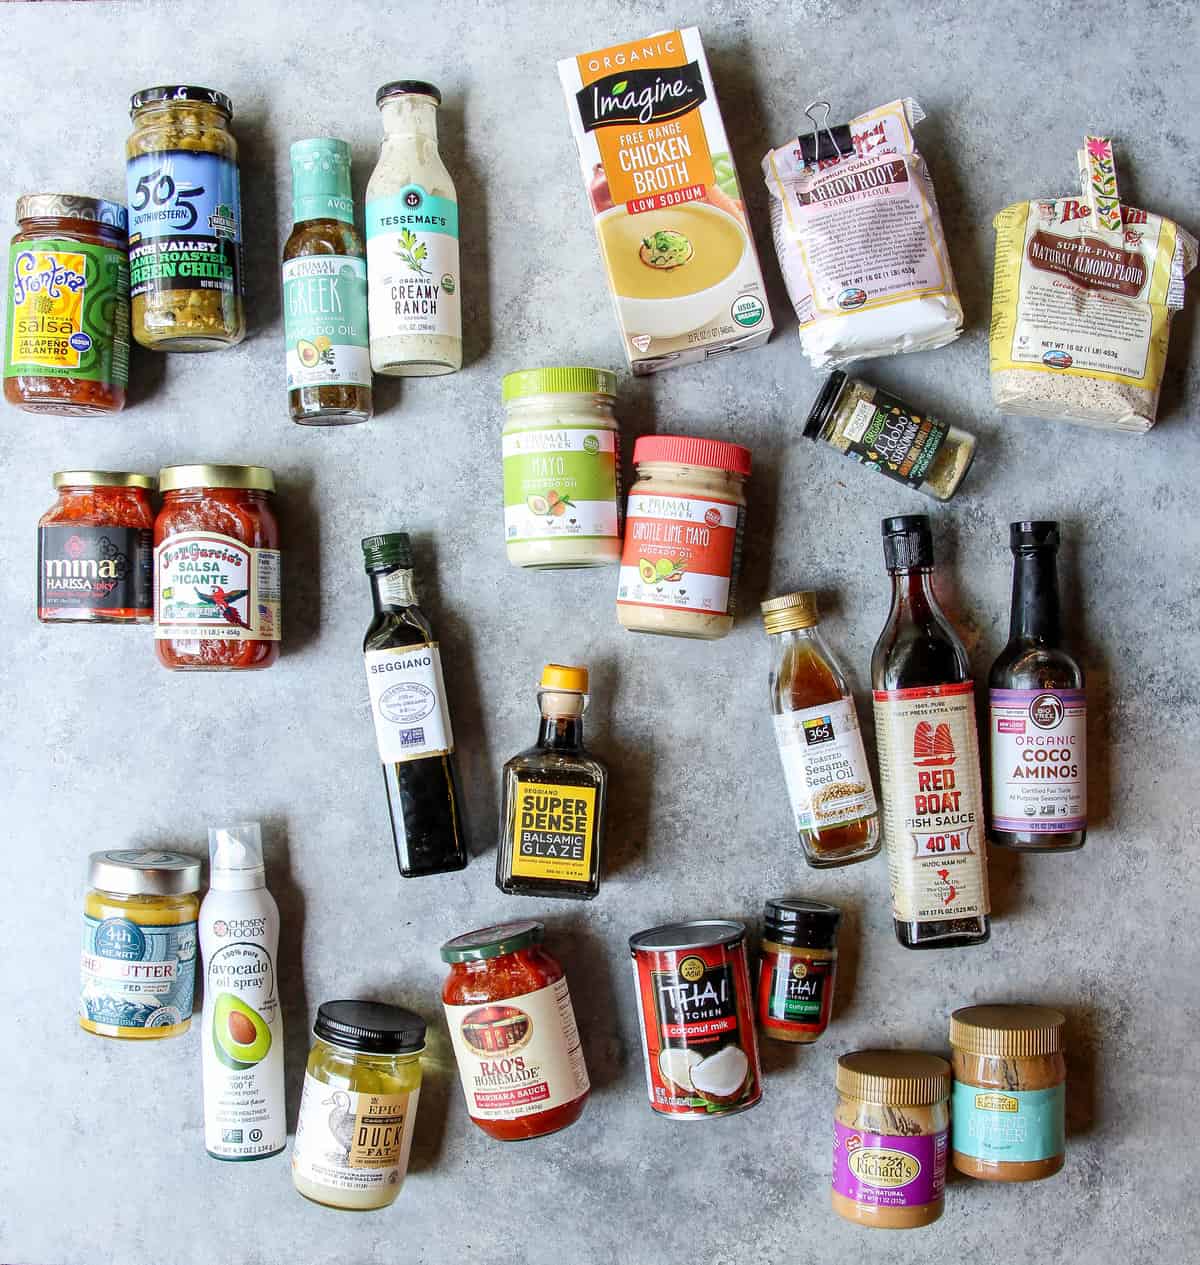 Whole30 Approved Products I LOVE.